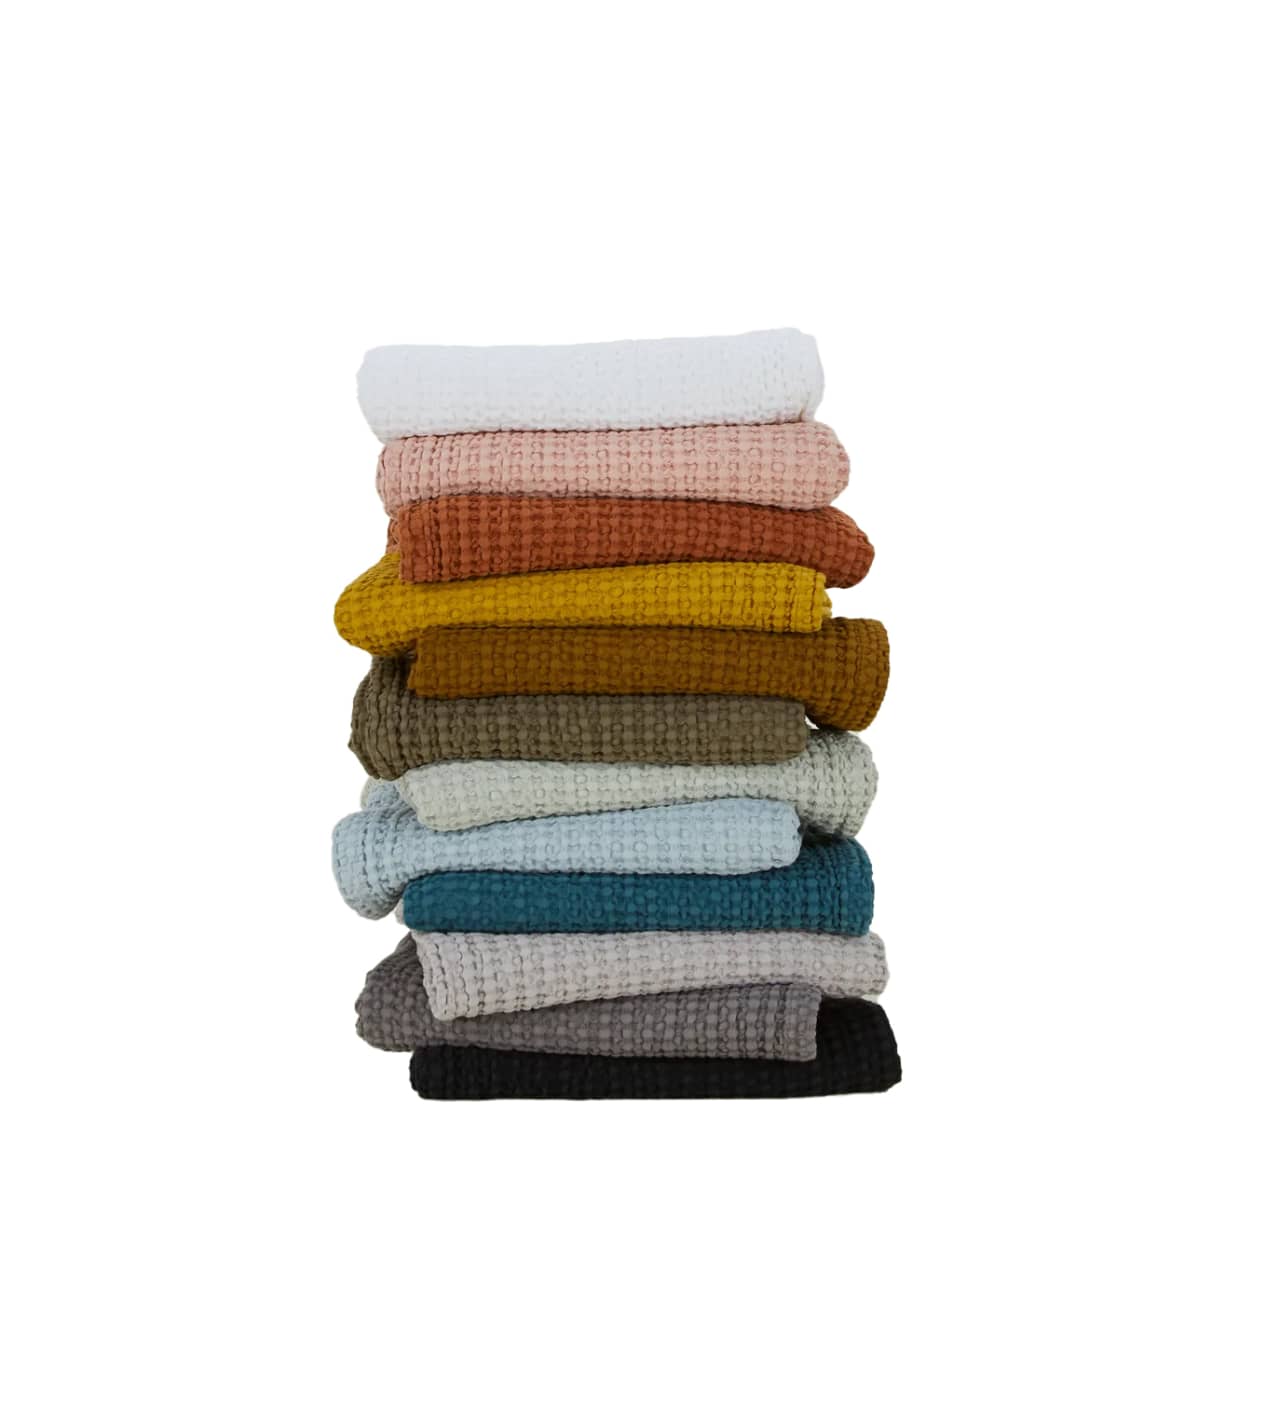 The 5 Best Bath Towels that Feel Soft and Look Stylish - Buy Side